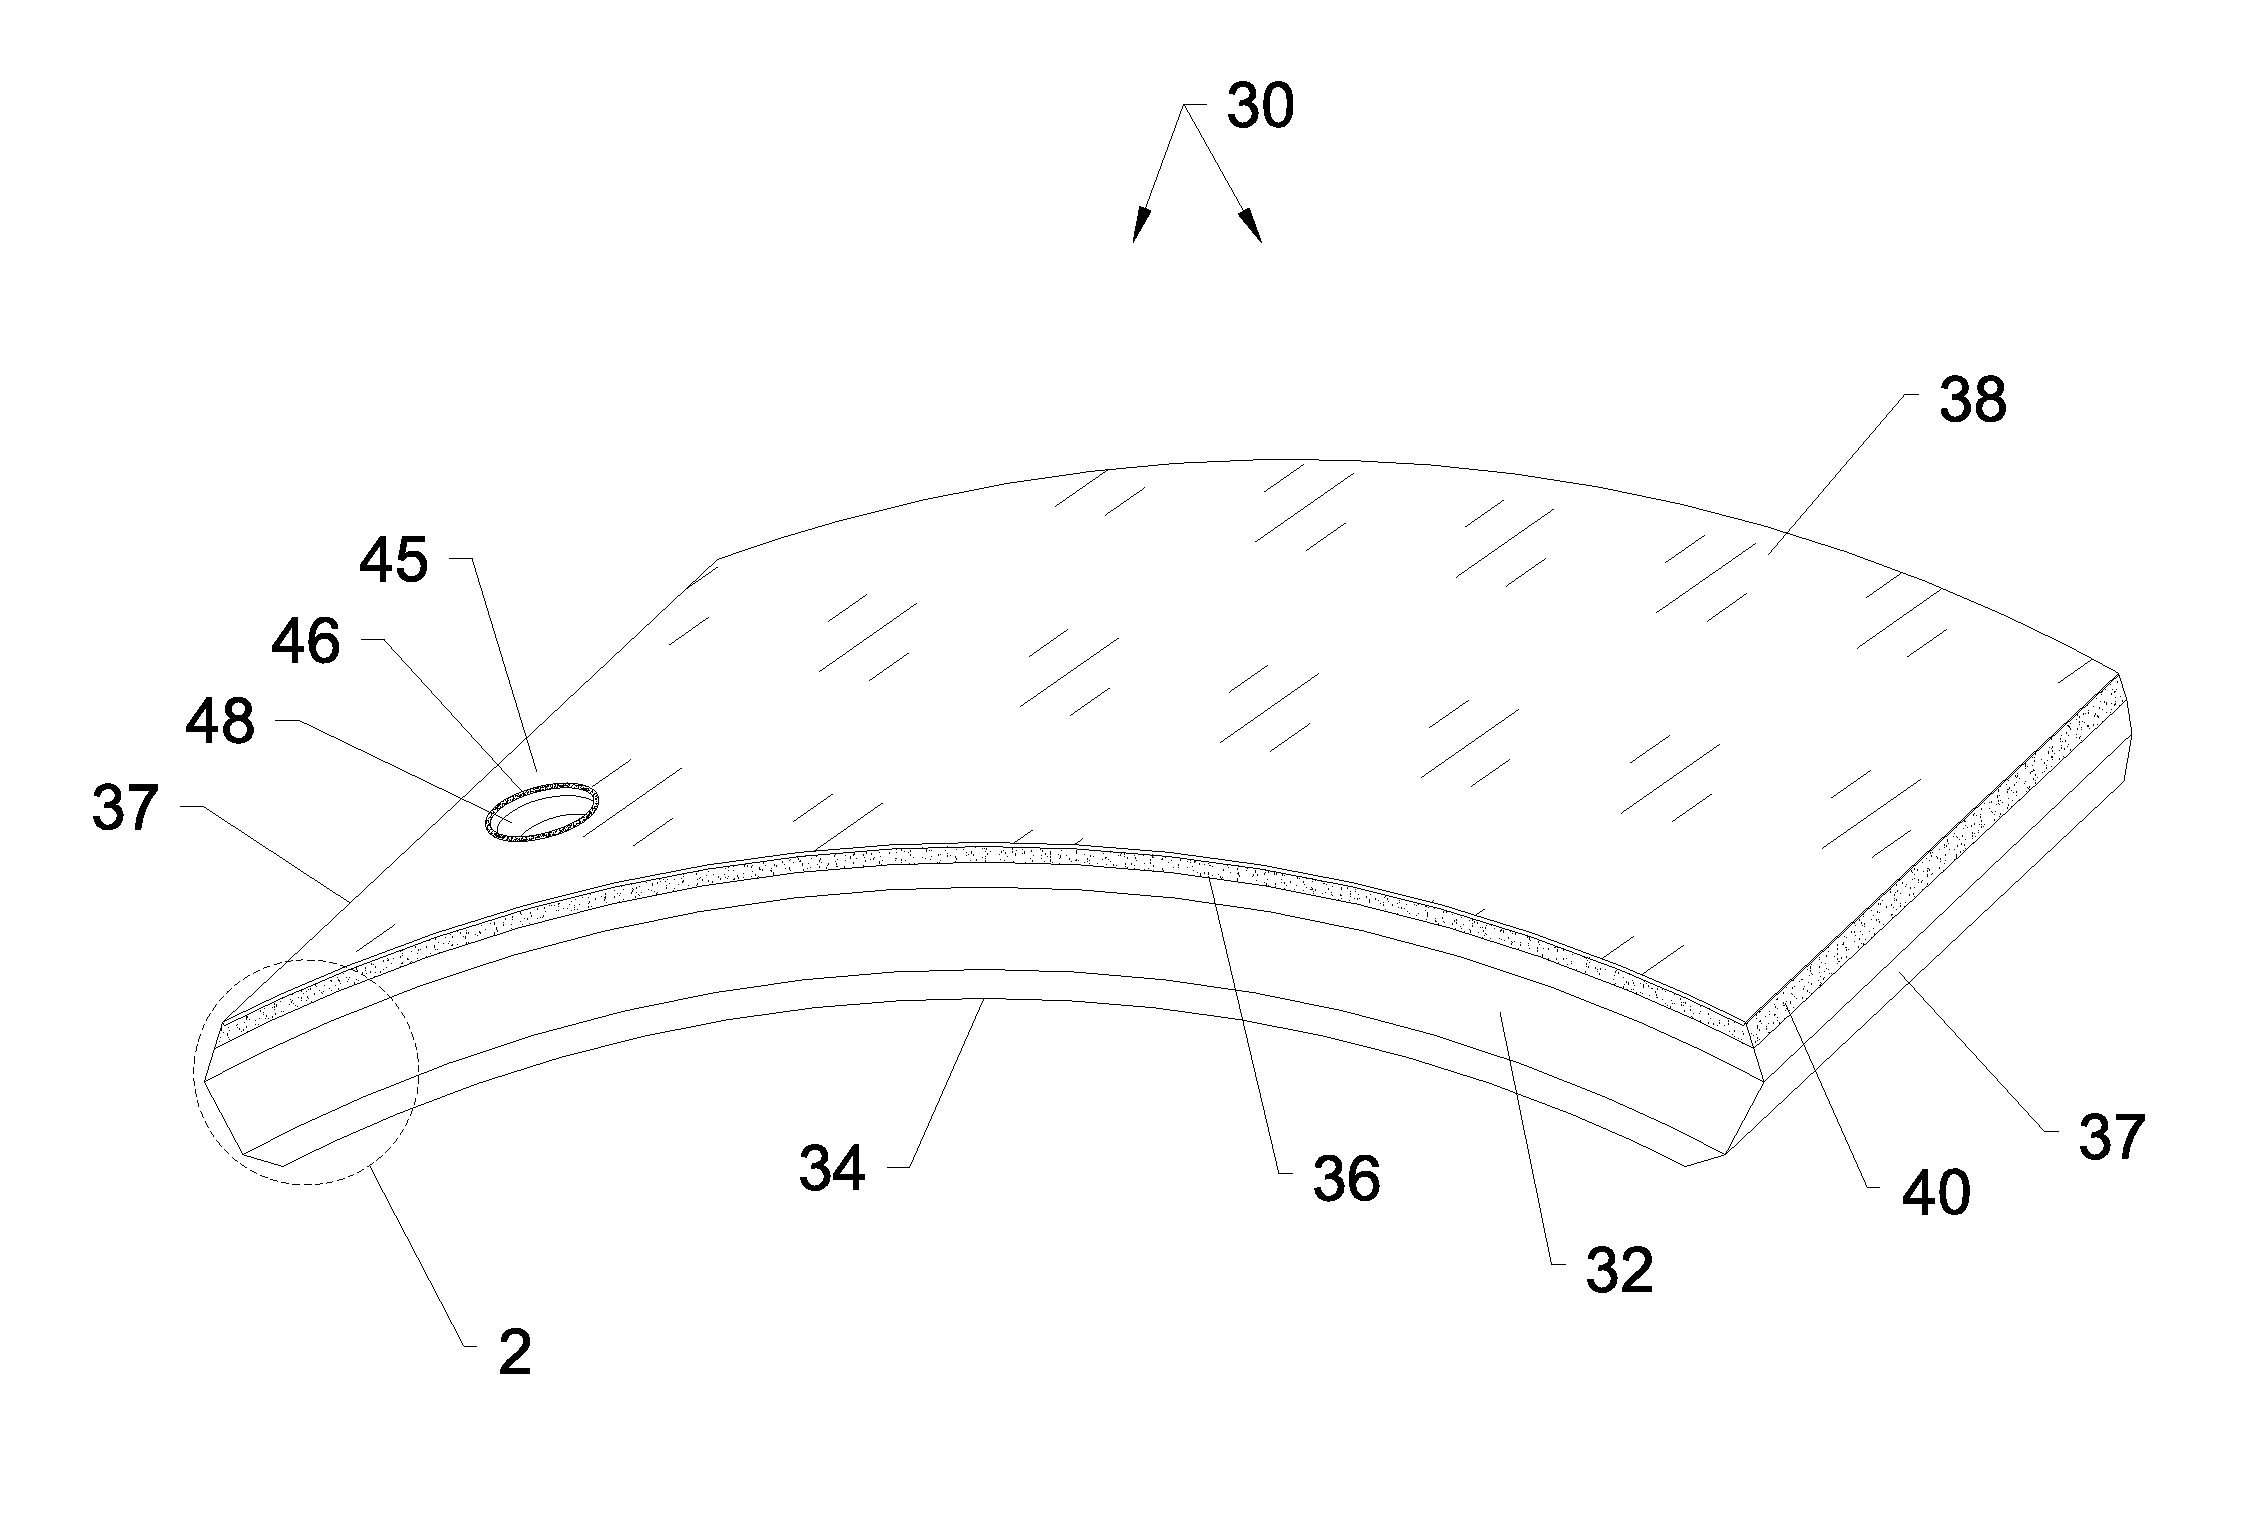 Bent, veneer-encapsulated heat-treated safety glass panels and methods of manufacture